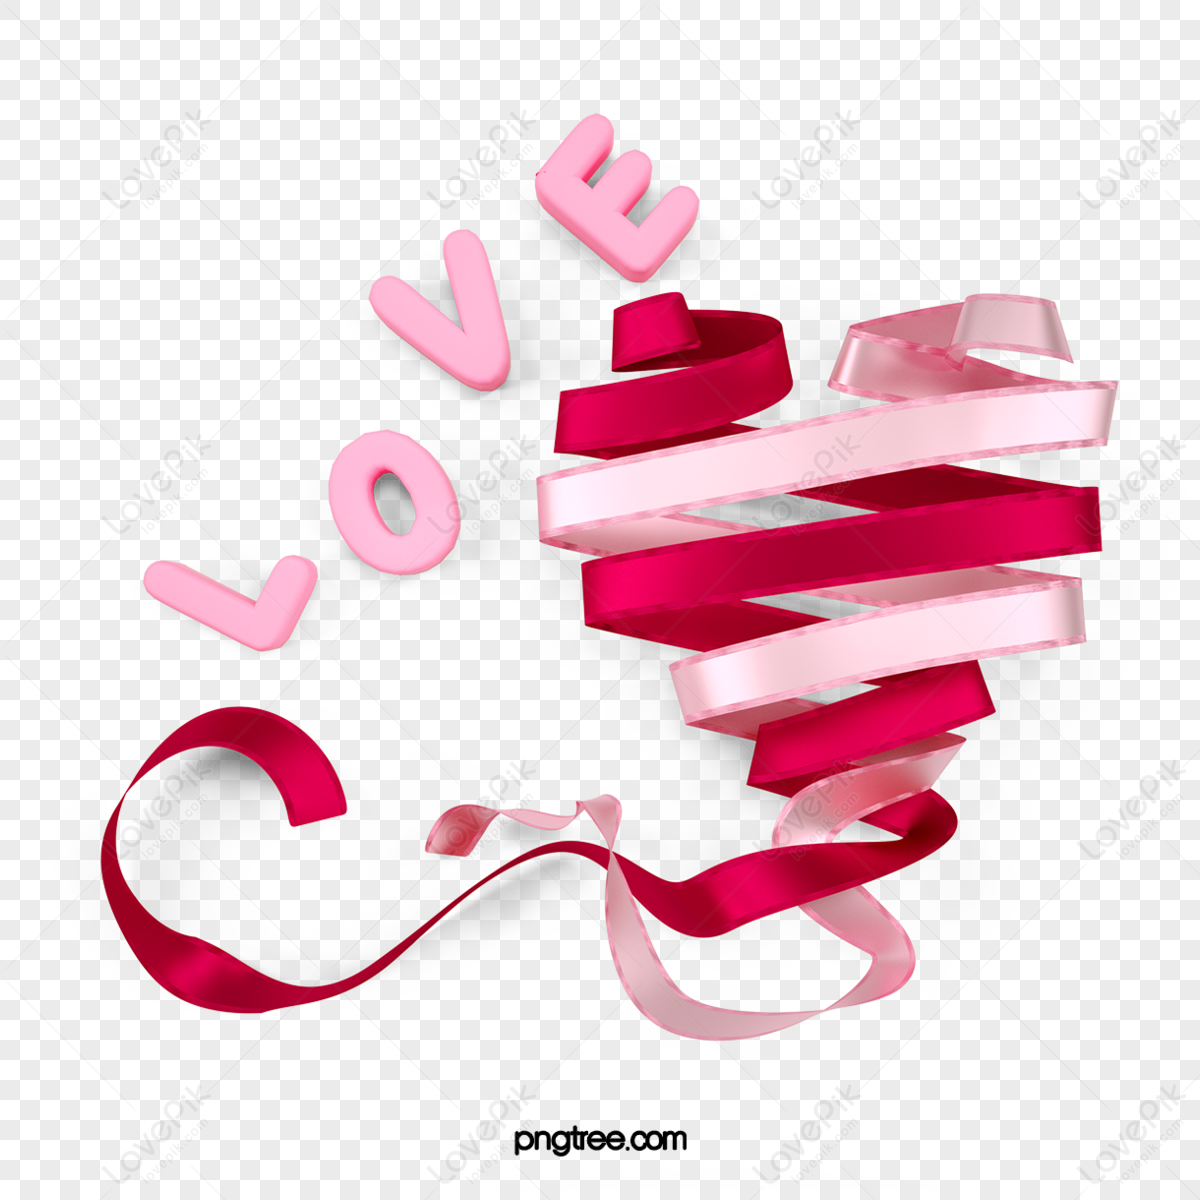 Valentines Day Ribbon png download - 7953*2274 - Free Transparent